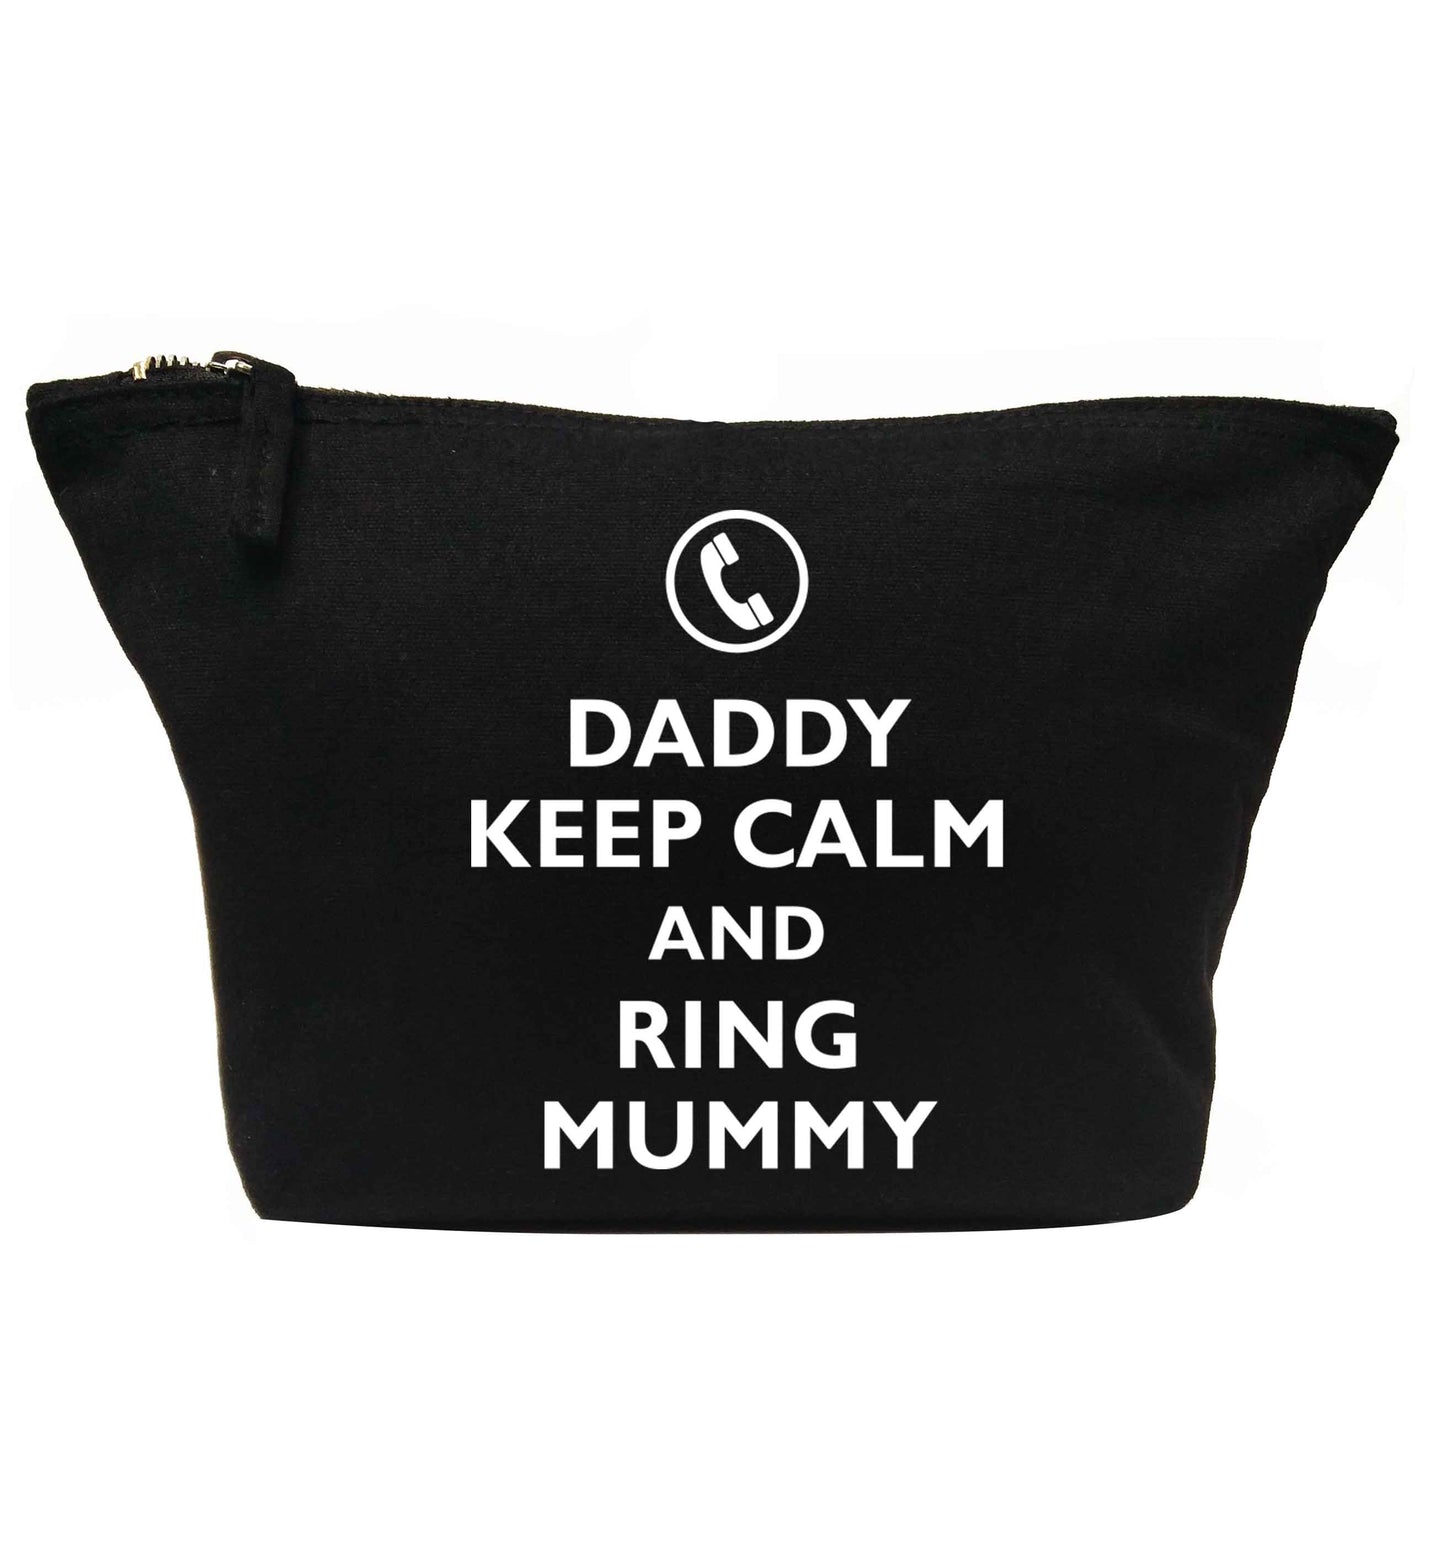 Daddy keep calm and ring mummy | Makeup / wash bag